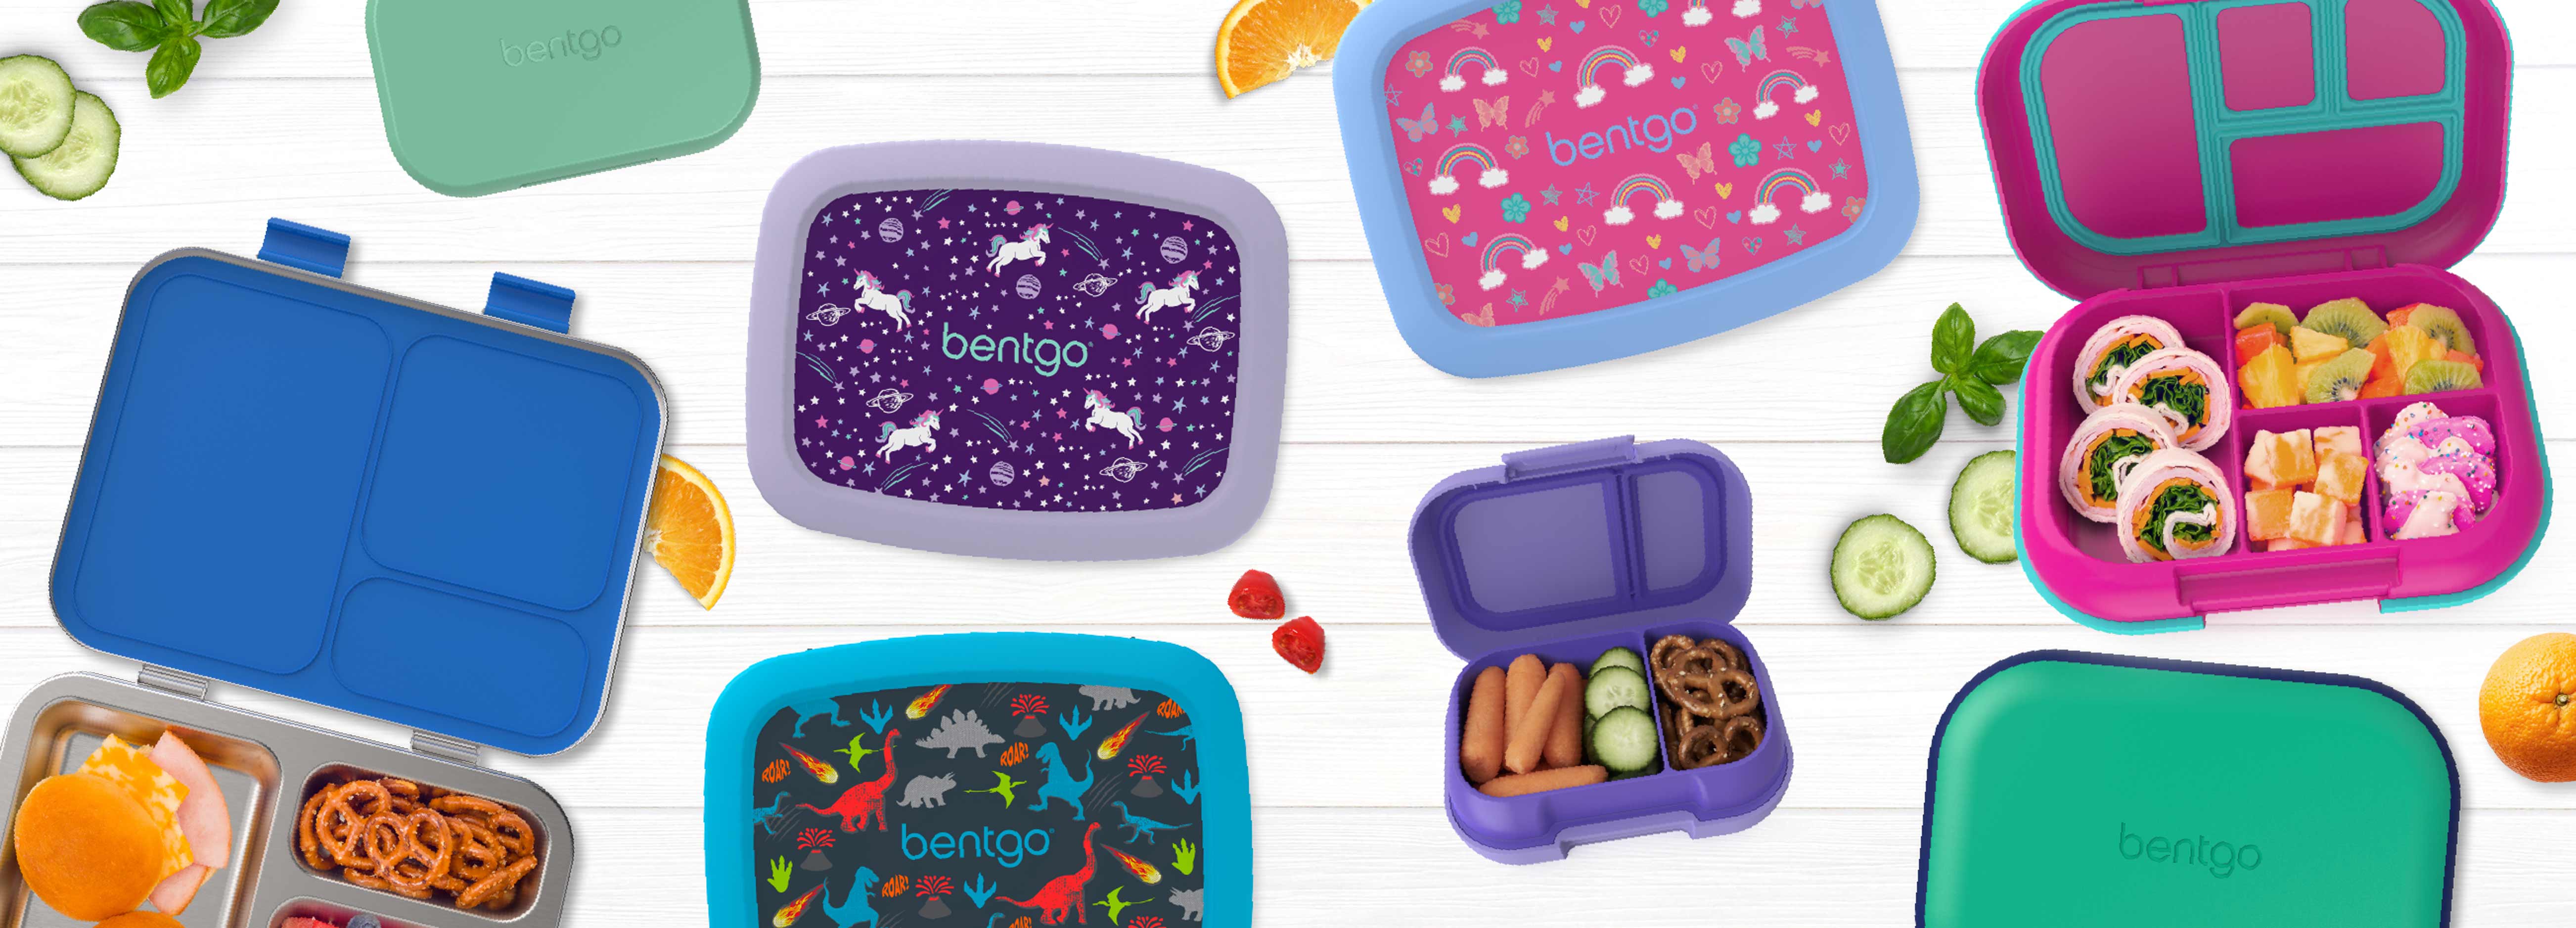 Bentgo®️ Kids - An Innovative Bento-style Lunch Box for Active